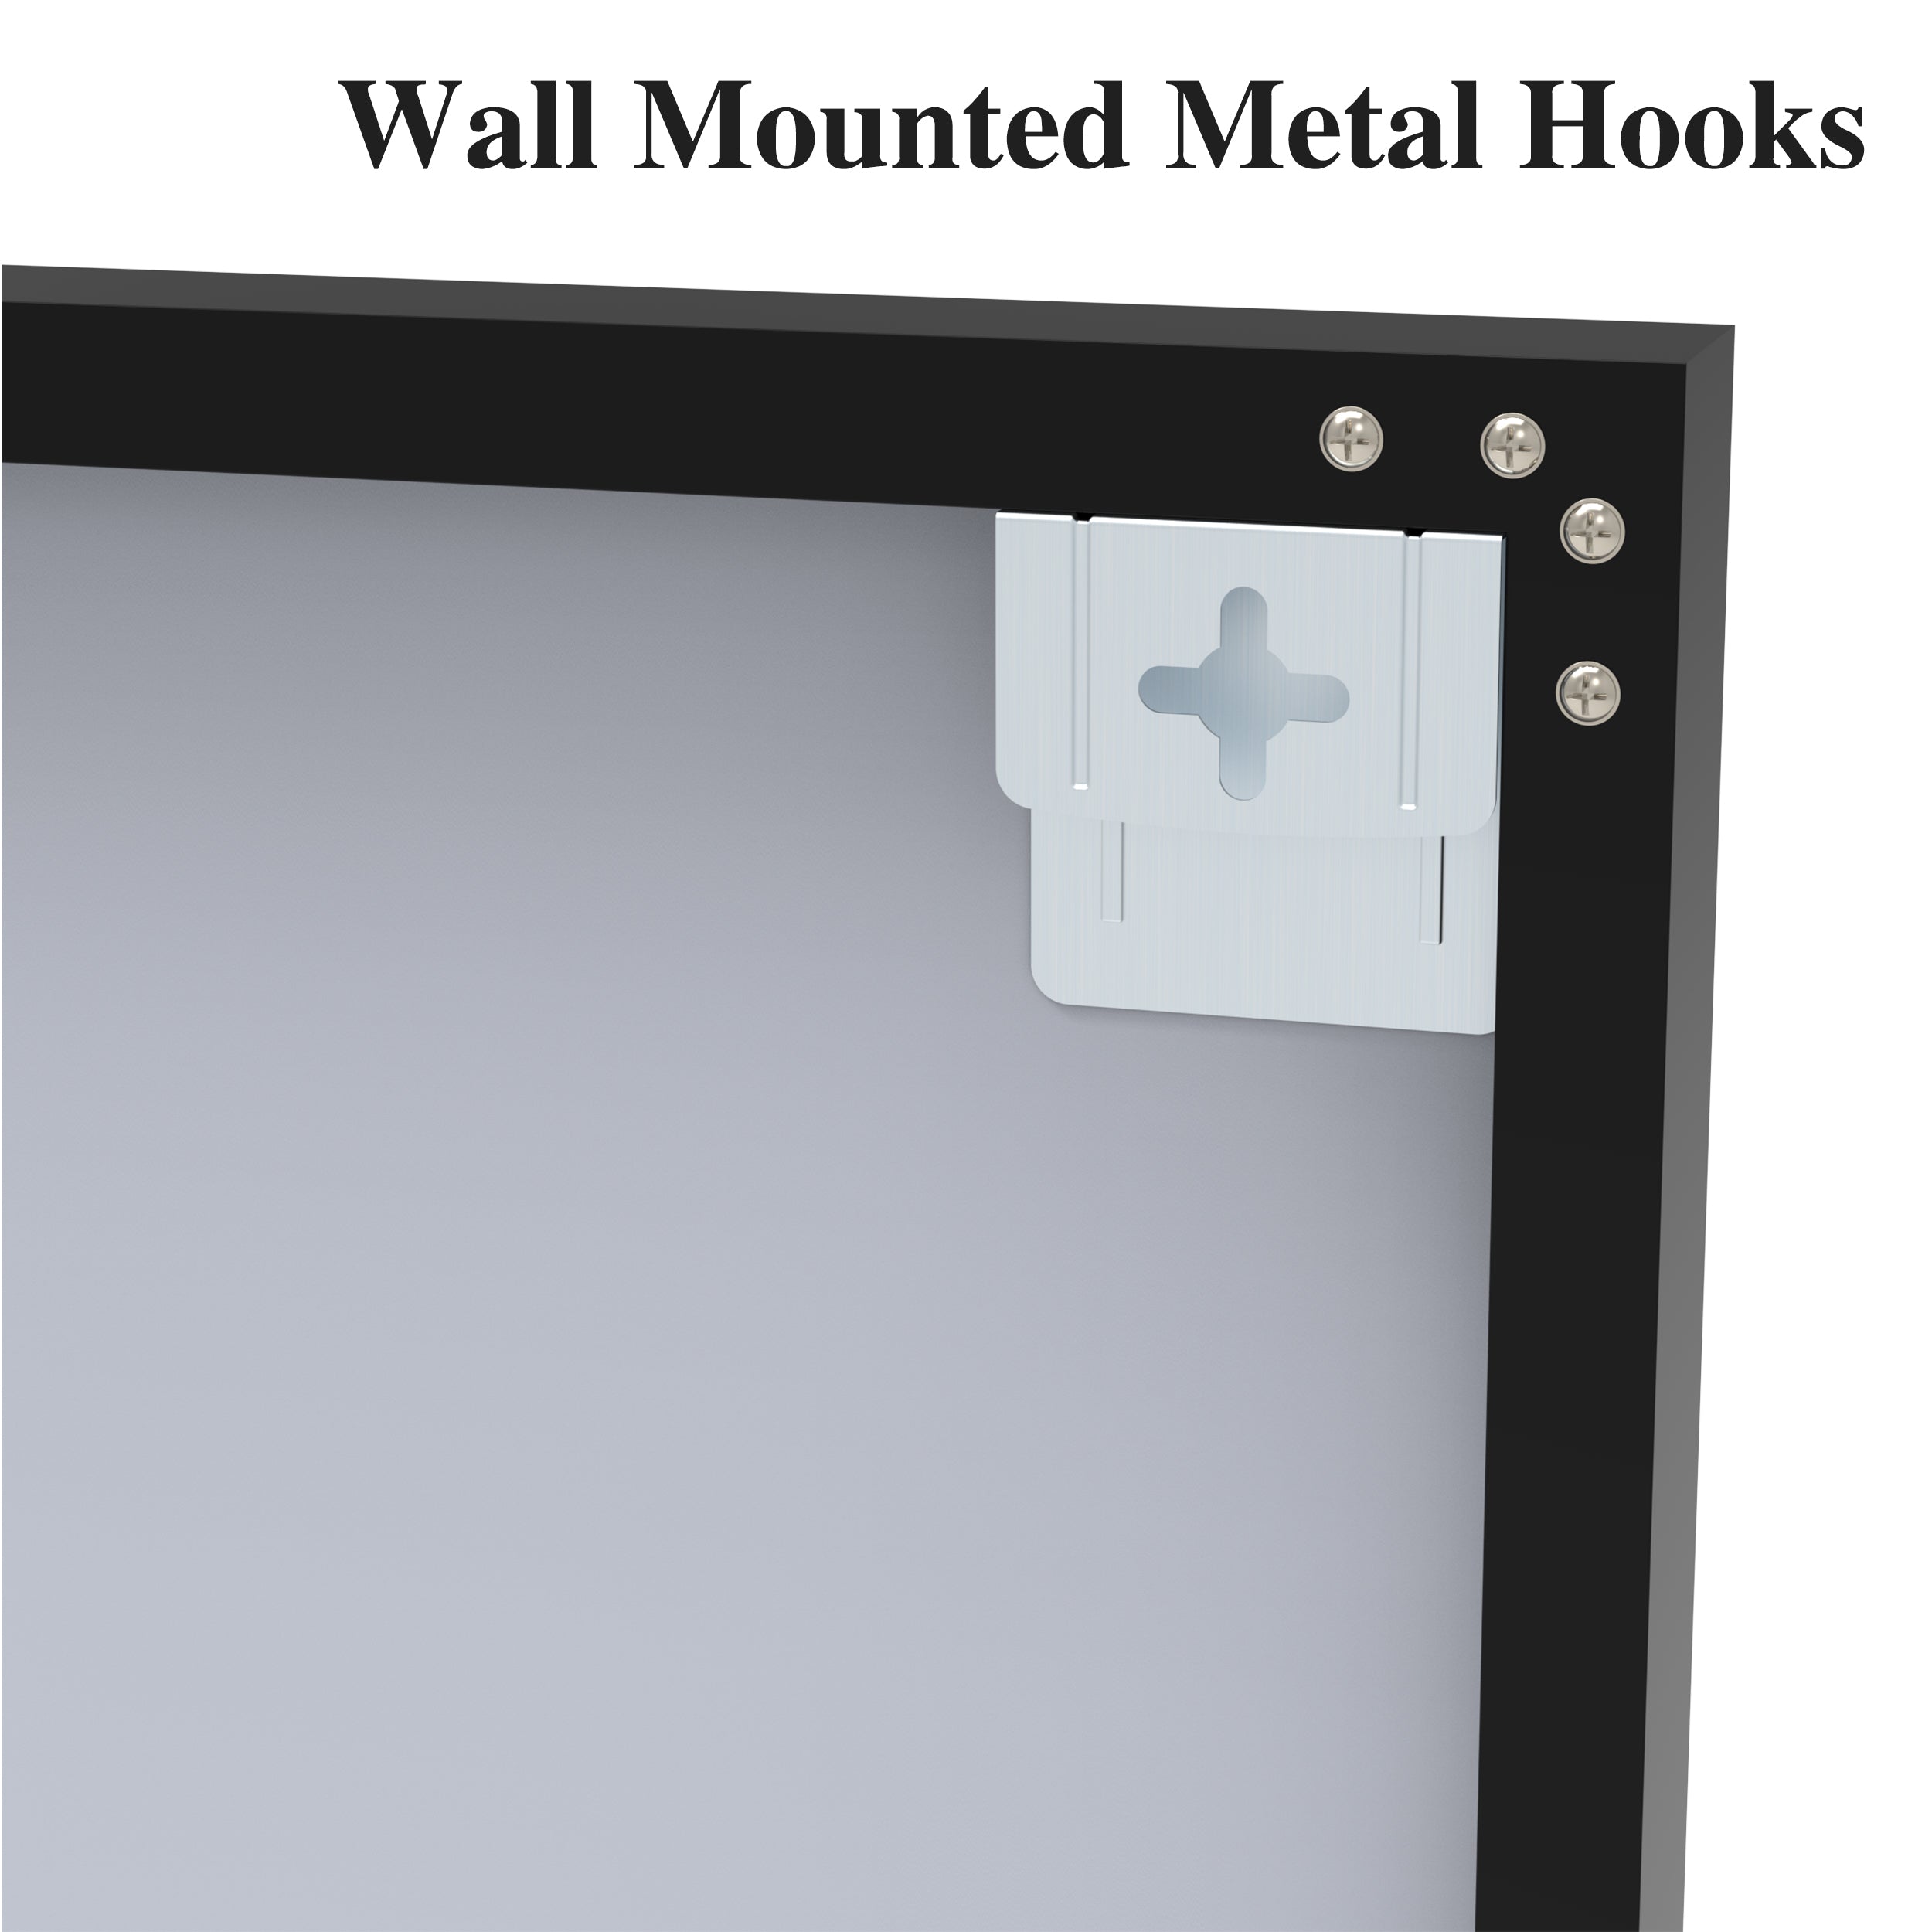 60*36" Oversized Modern Rectangle Bathroom Mirror with Balck Frame Decorative Large Wall Mirrors for Bathroom Living Room Bedroom Vertical or Horizontal Wall Mounted mirror with Aluminum Frame